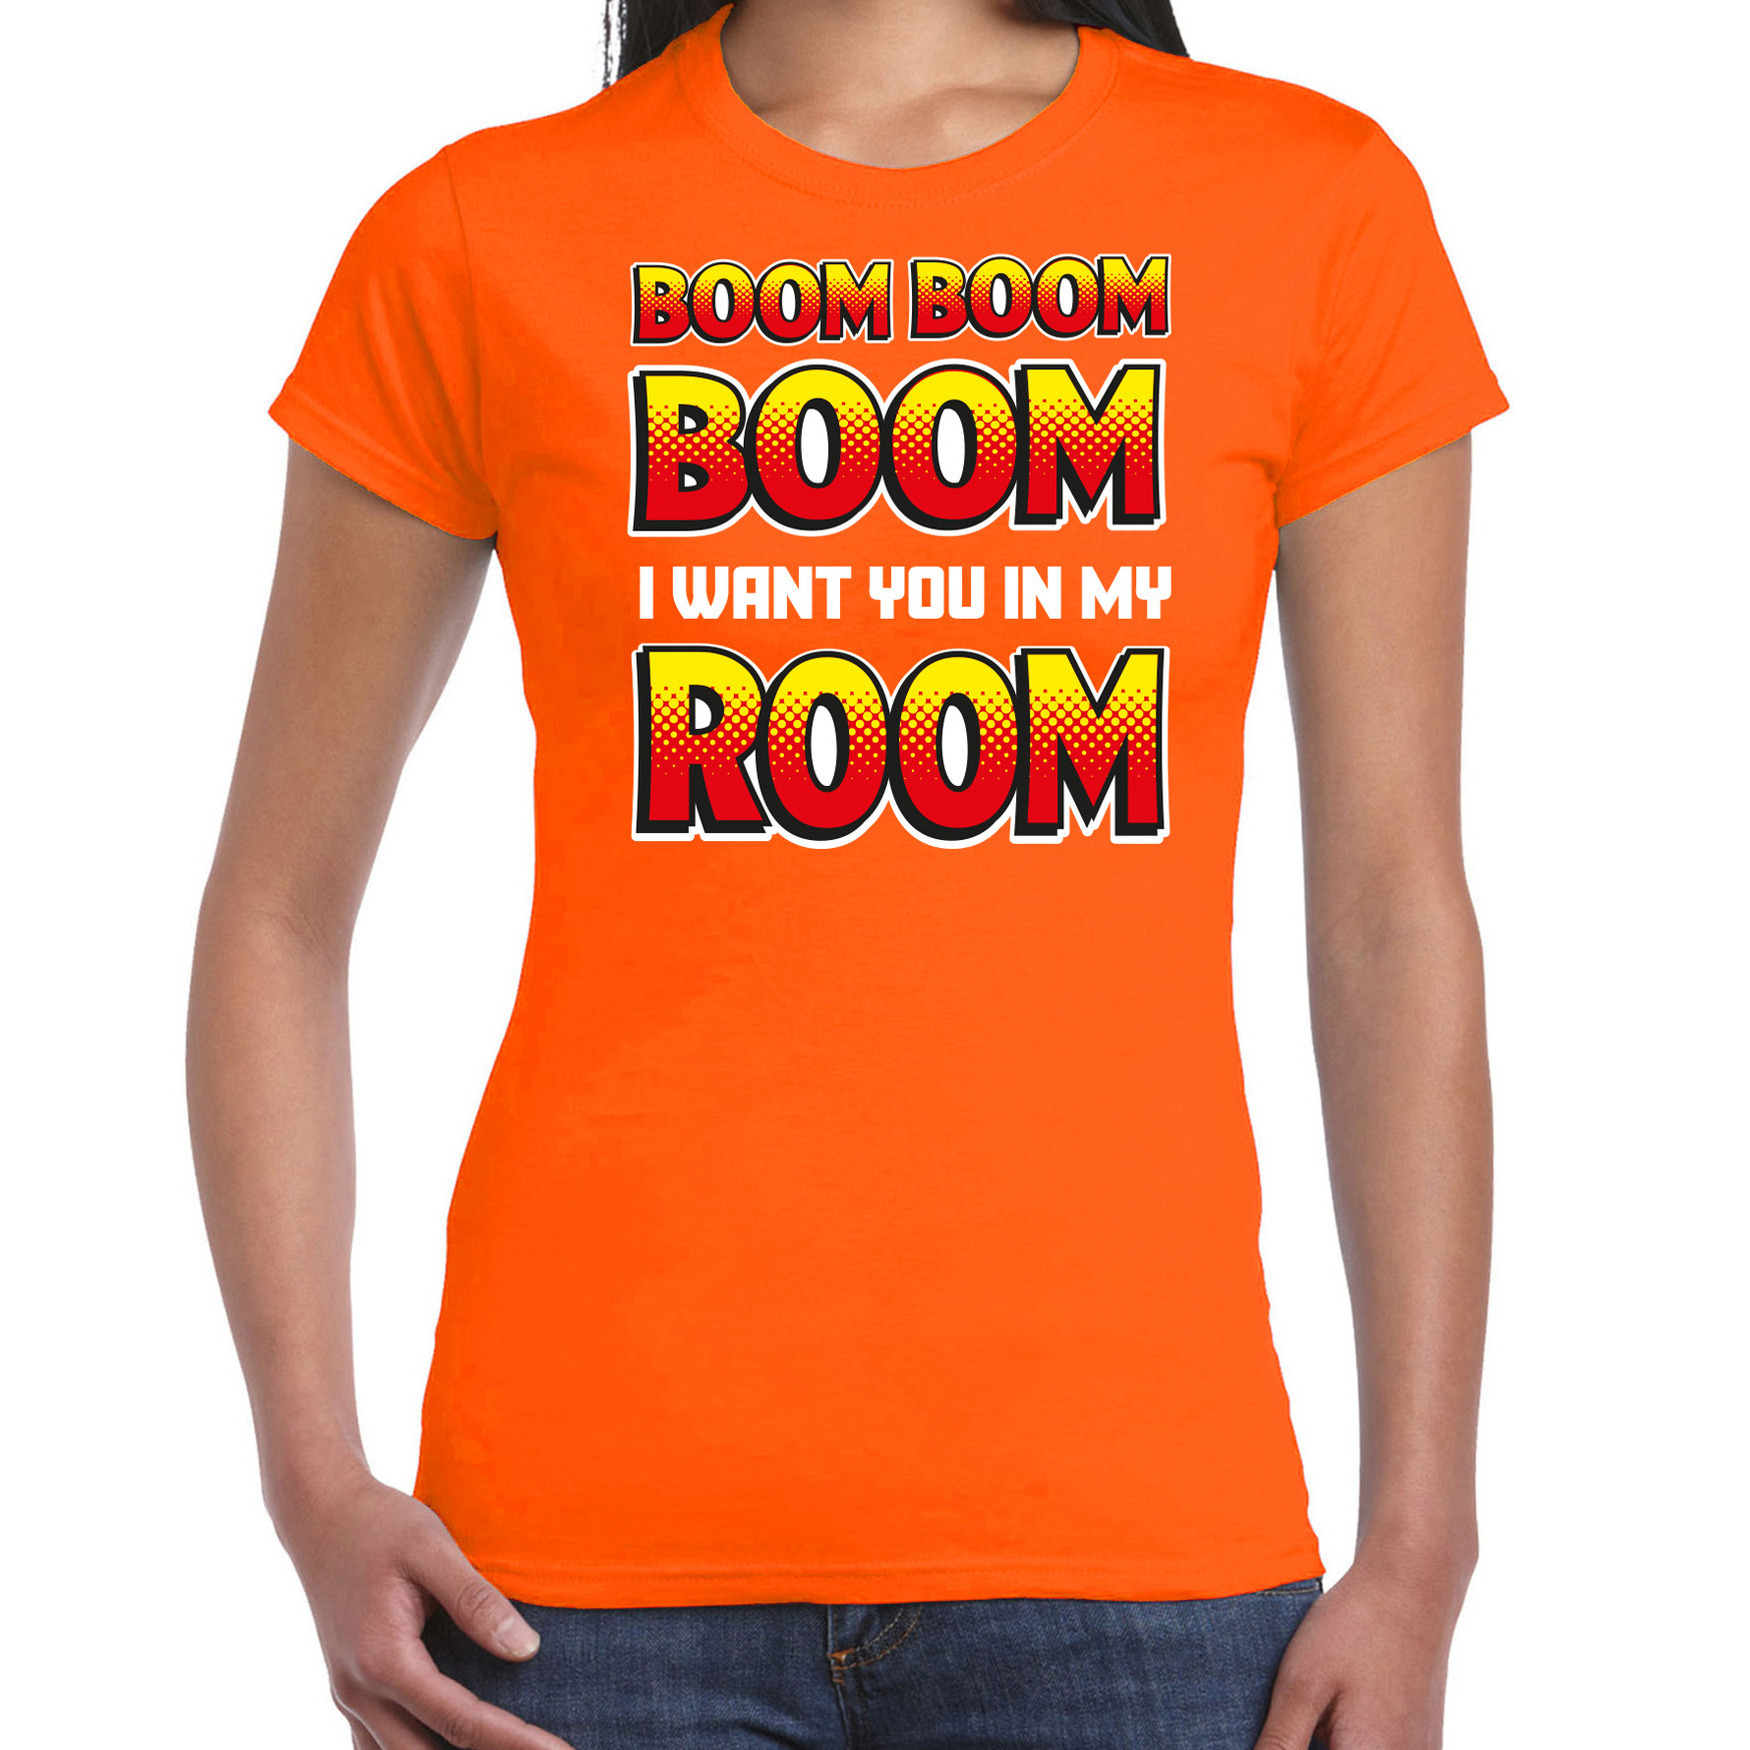 Foute party t-shirt voor dames Boom boom boom i want you in my room oranje carnaval-themafeest